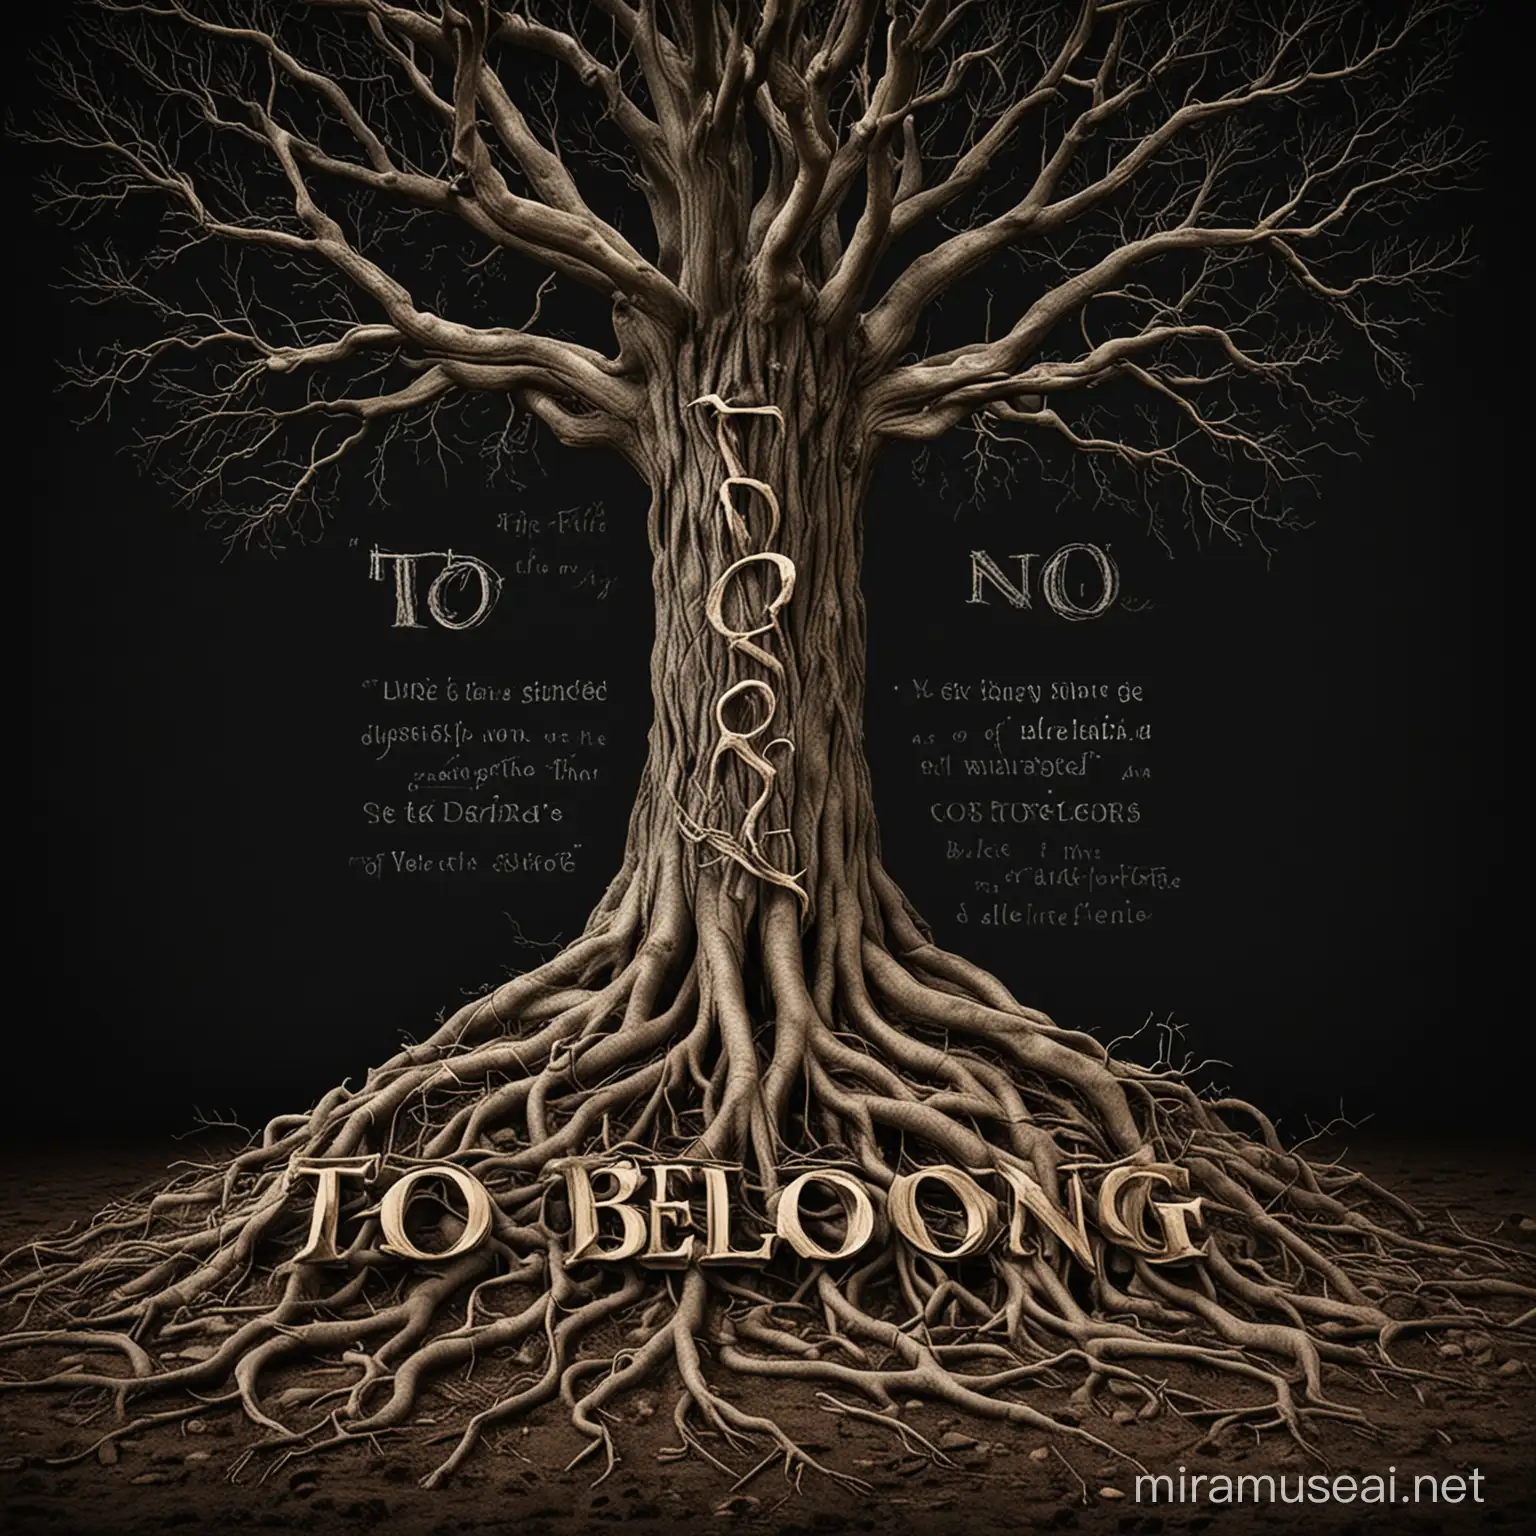 Enveloping Tree Roots Spell To Belong on Black Background